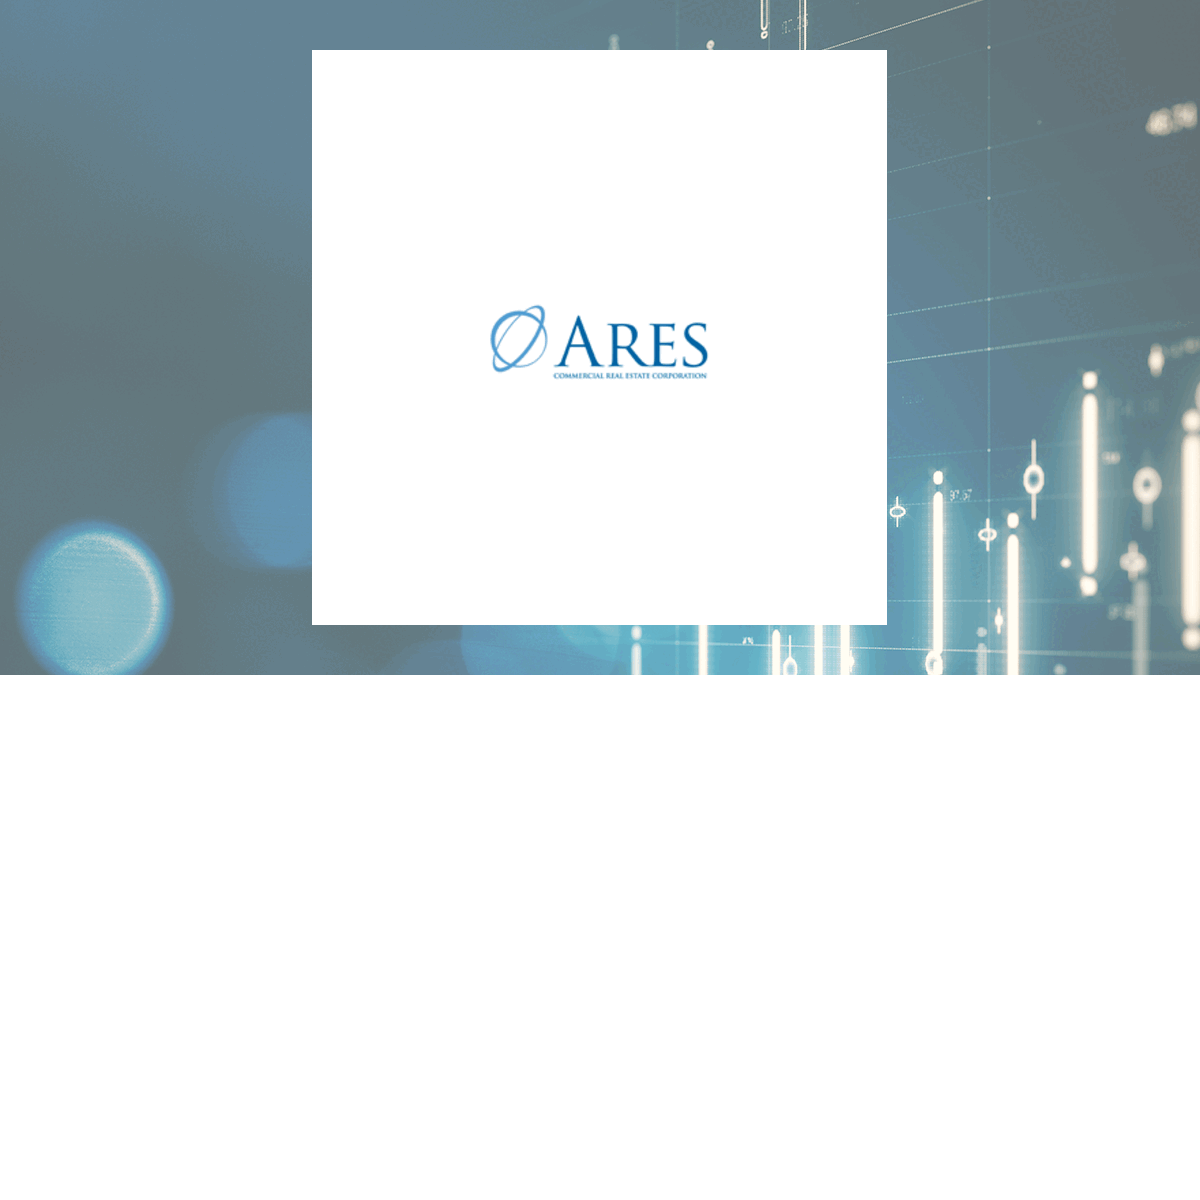 Ares Commercial Real Estate logo